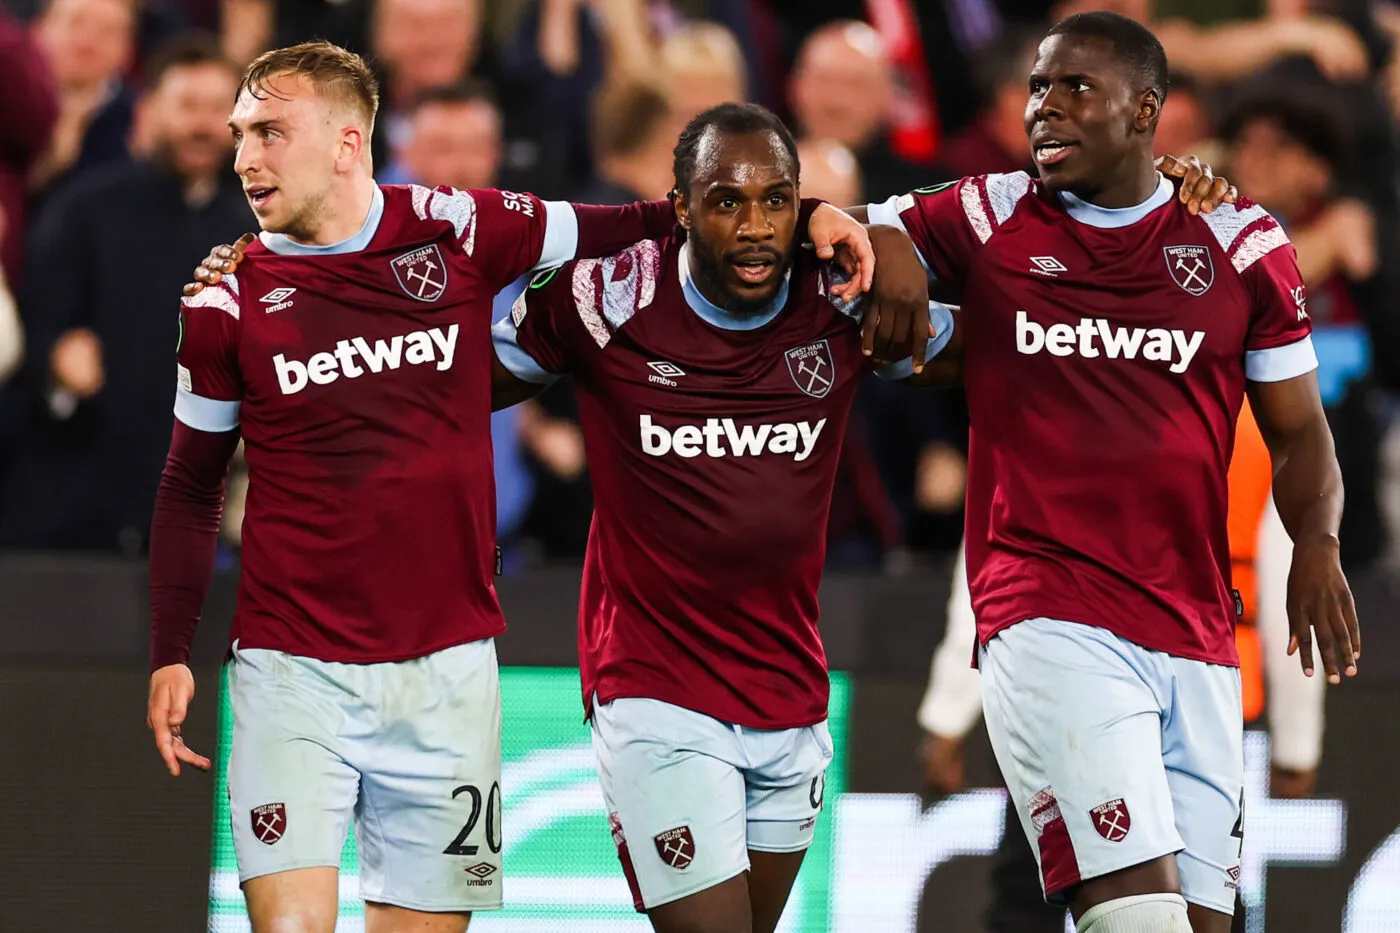 11th May 2023; London Stadium, London, England; Europa Conference League Football, Semi Final First Leg, West Ham United versus AZ Alkmaar; Michail Antonio of West Ham United celebrates with Jarrod Bowen and Kurt Zouma after he scores for 2-1 in the 75th minute - Photo by Icon sport